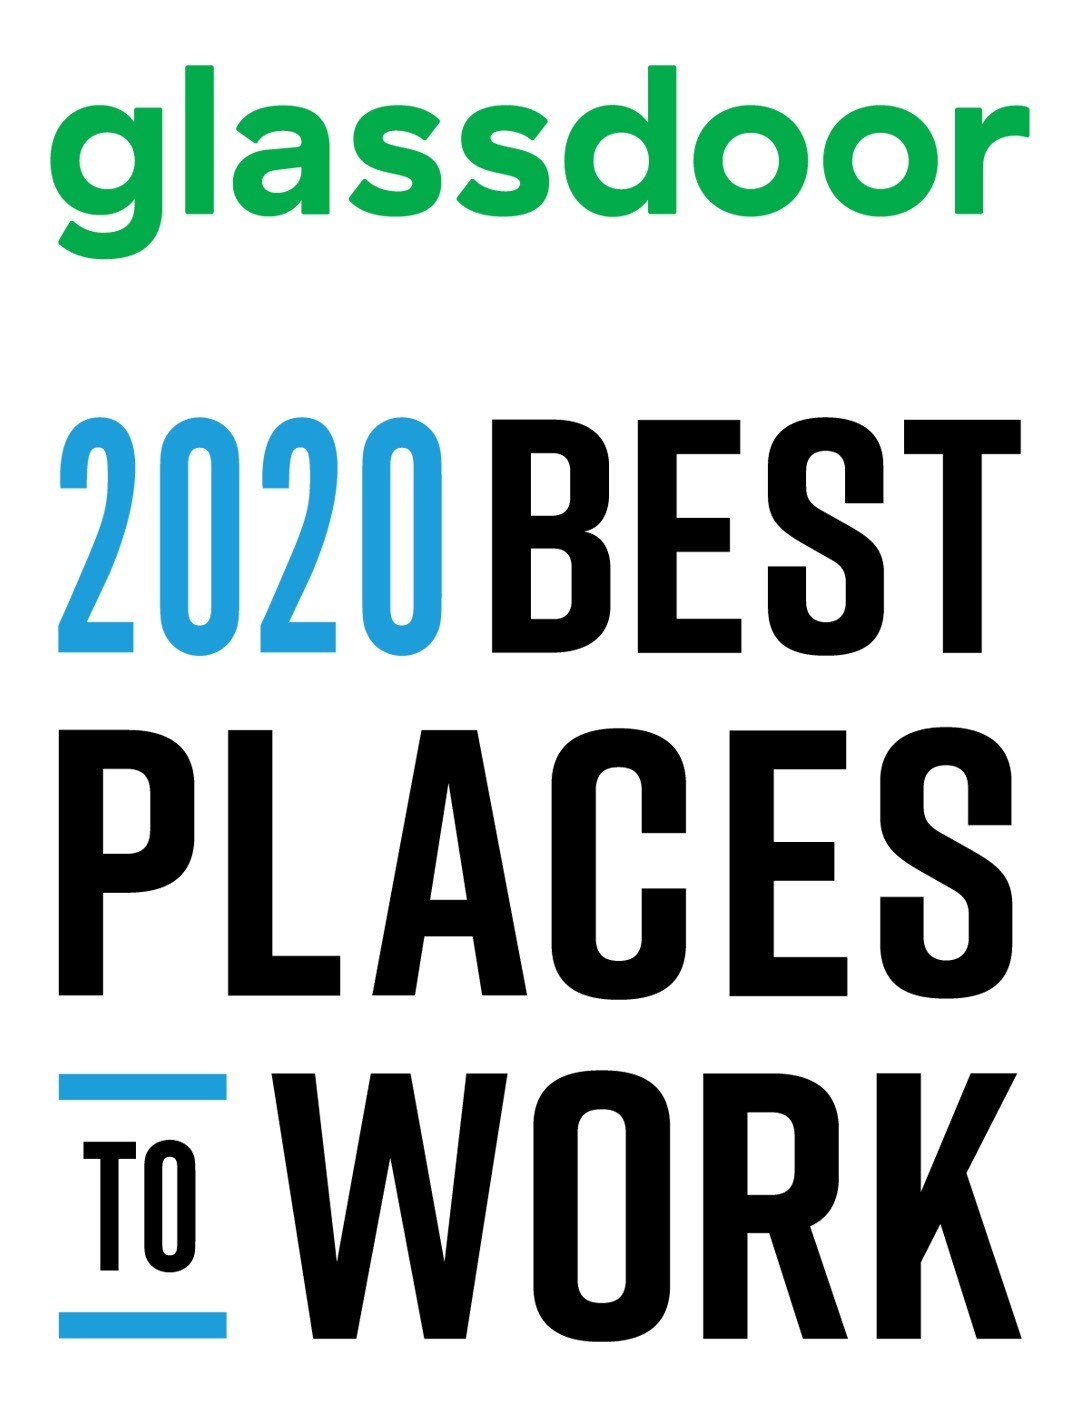 Icon Request: glassdoor-logo · Issue #10793 · FortAwesome/Font-Awesome ·  GitHub